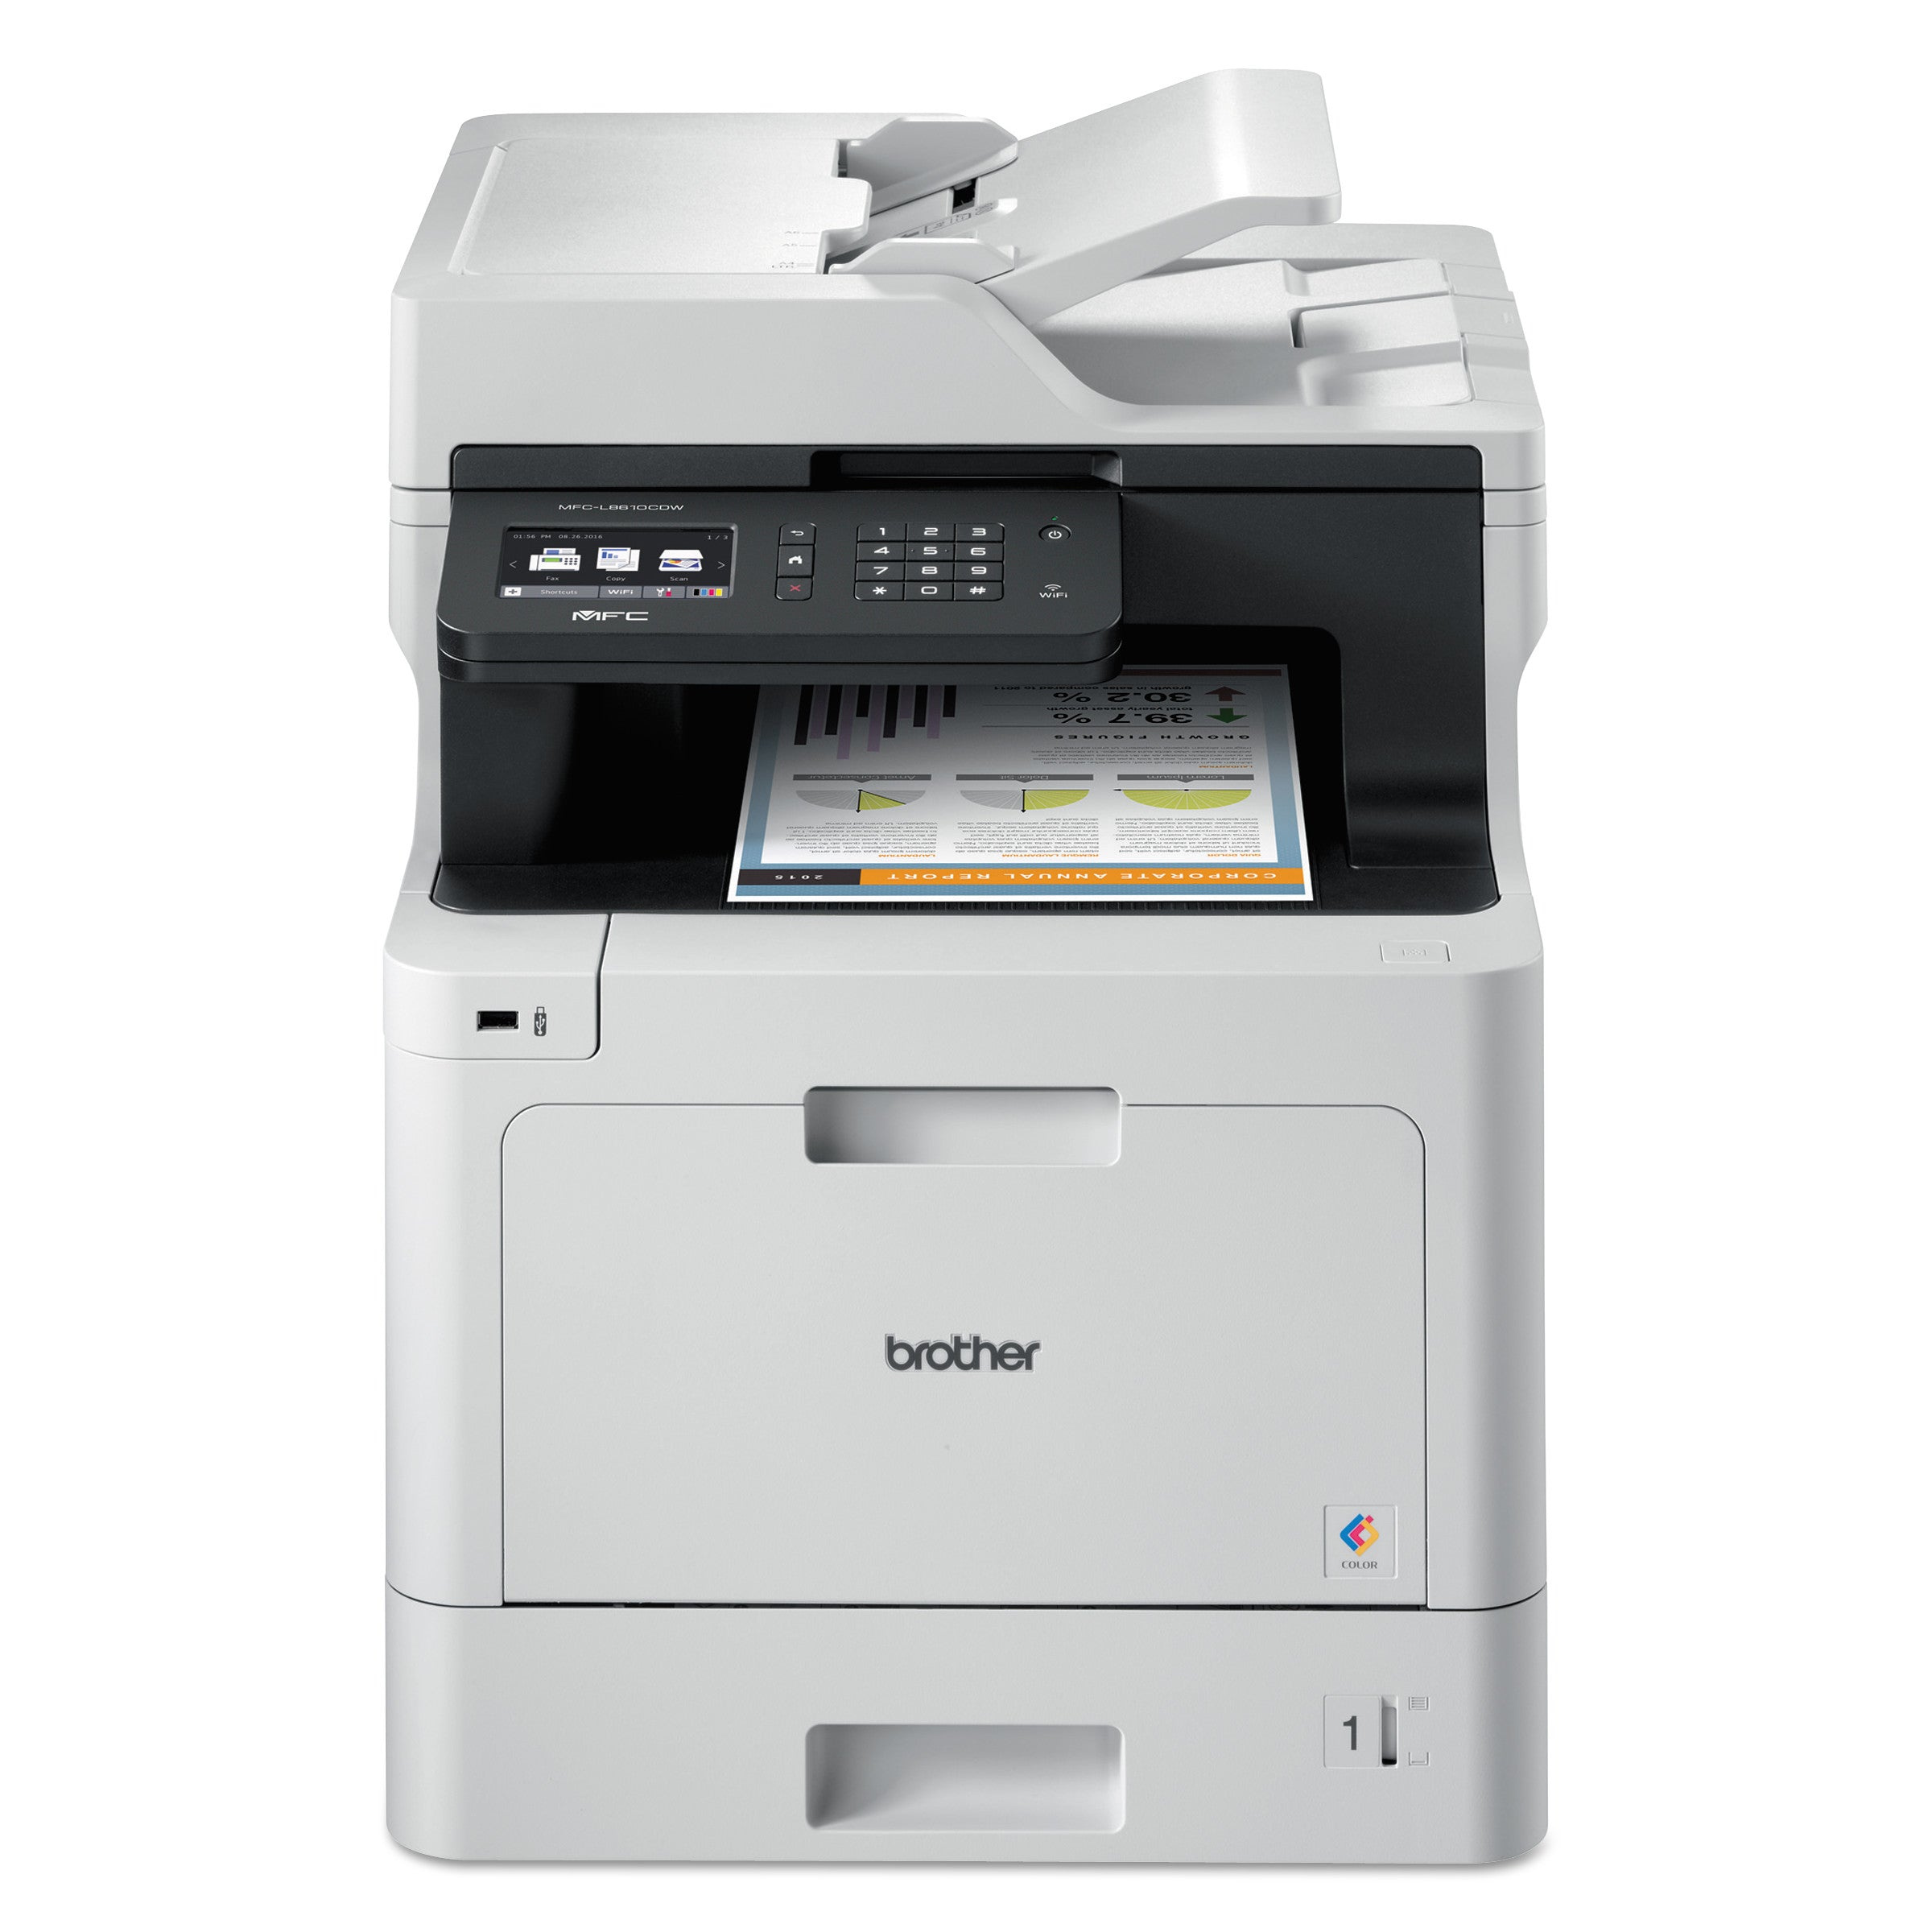 mfcl8610cdw-business-color-laser-all-in-one-printer-with-duplex-printing-and-wireless-networking_brtmfcl8610cdw - 1